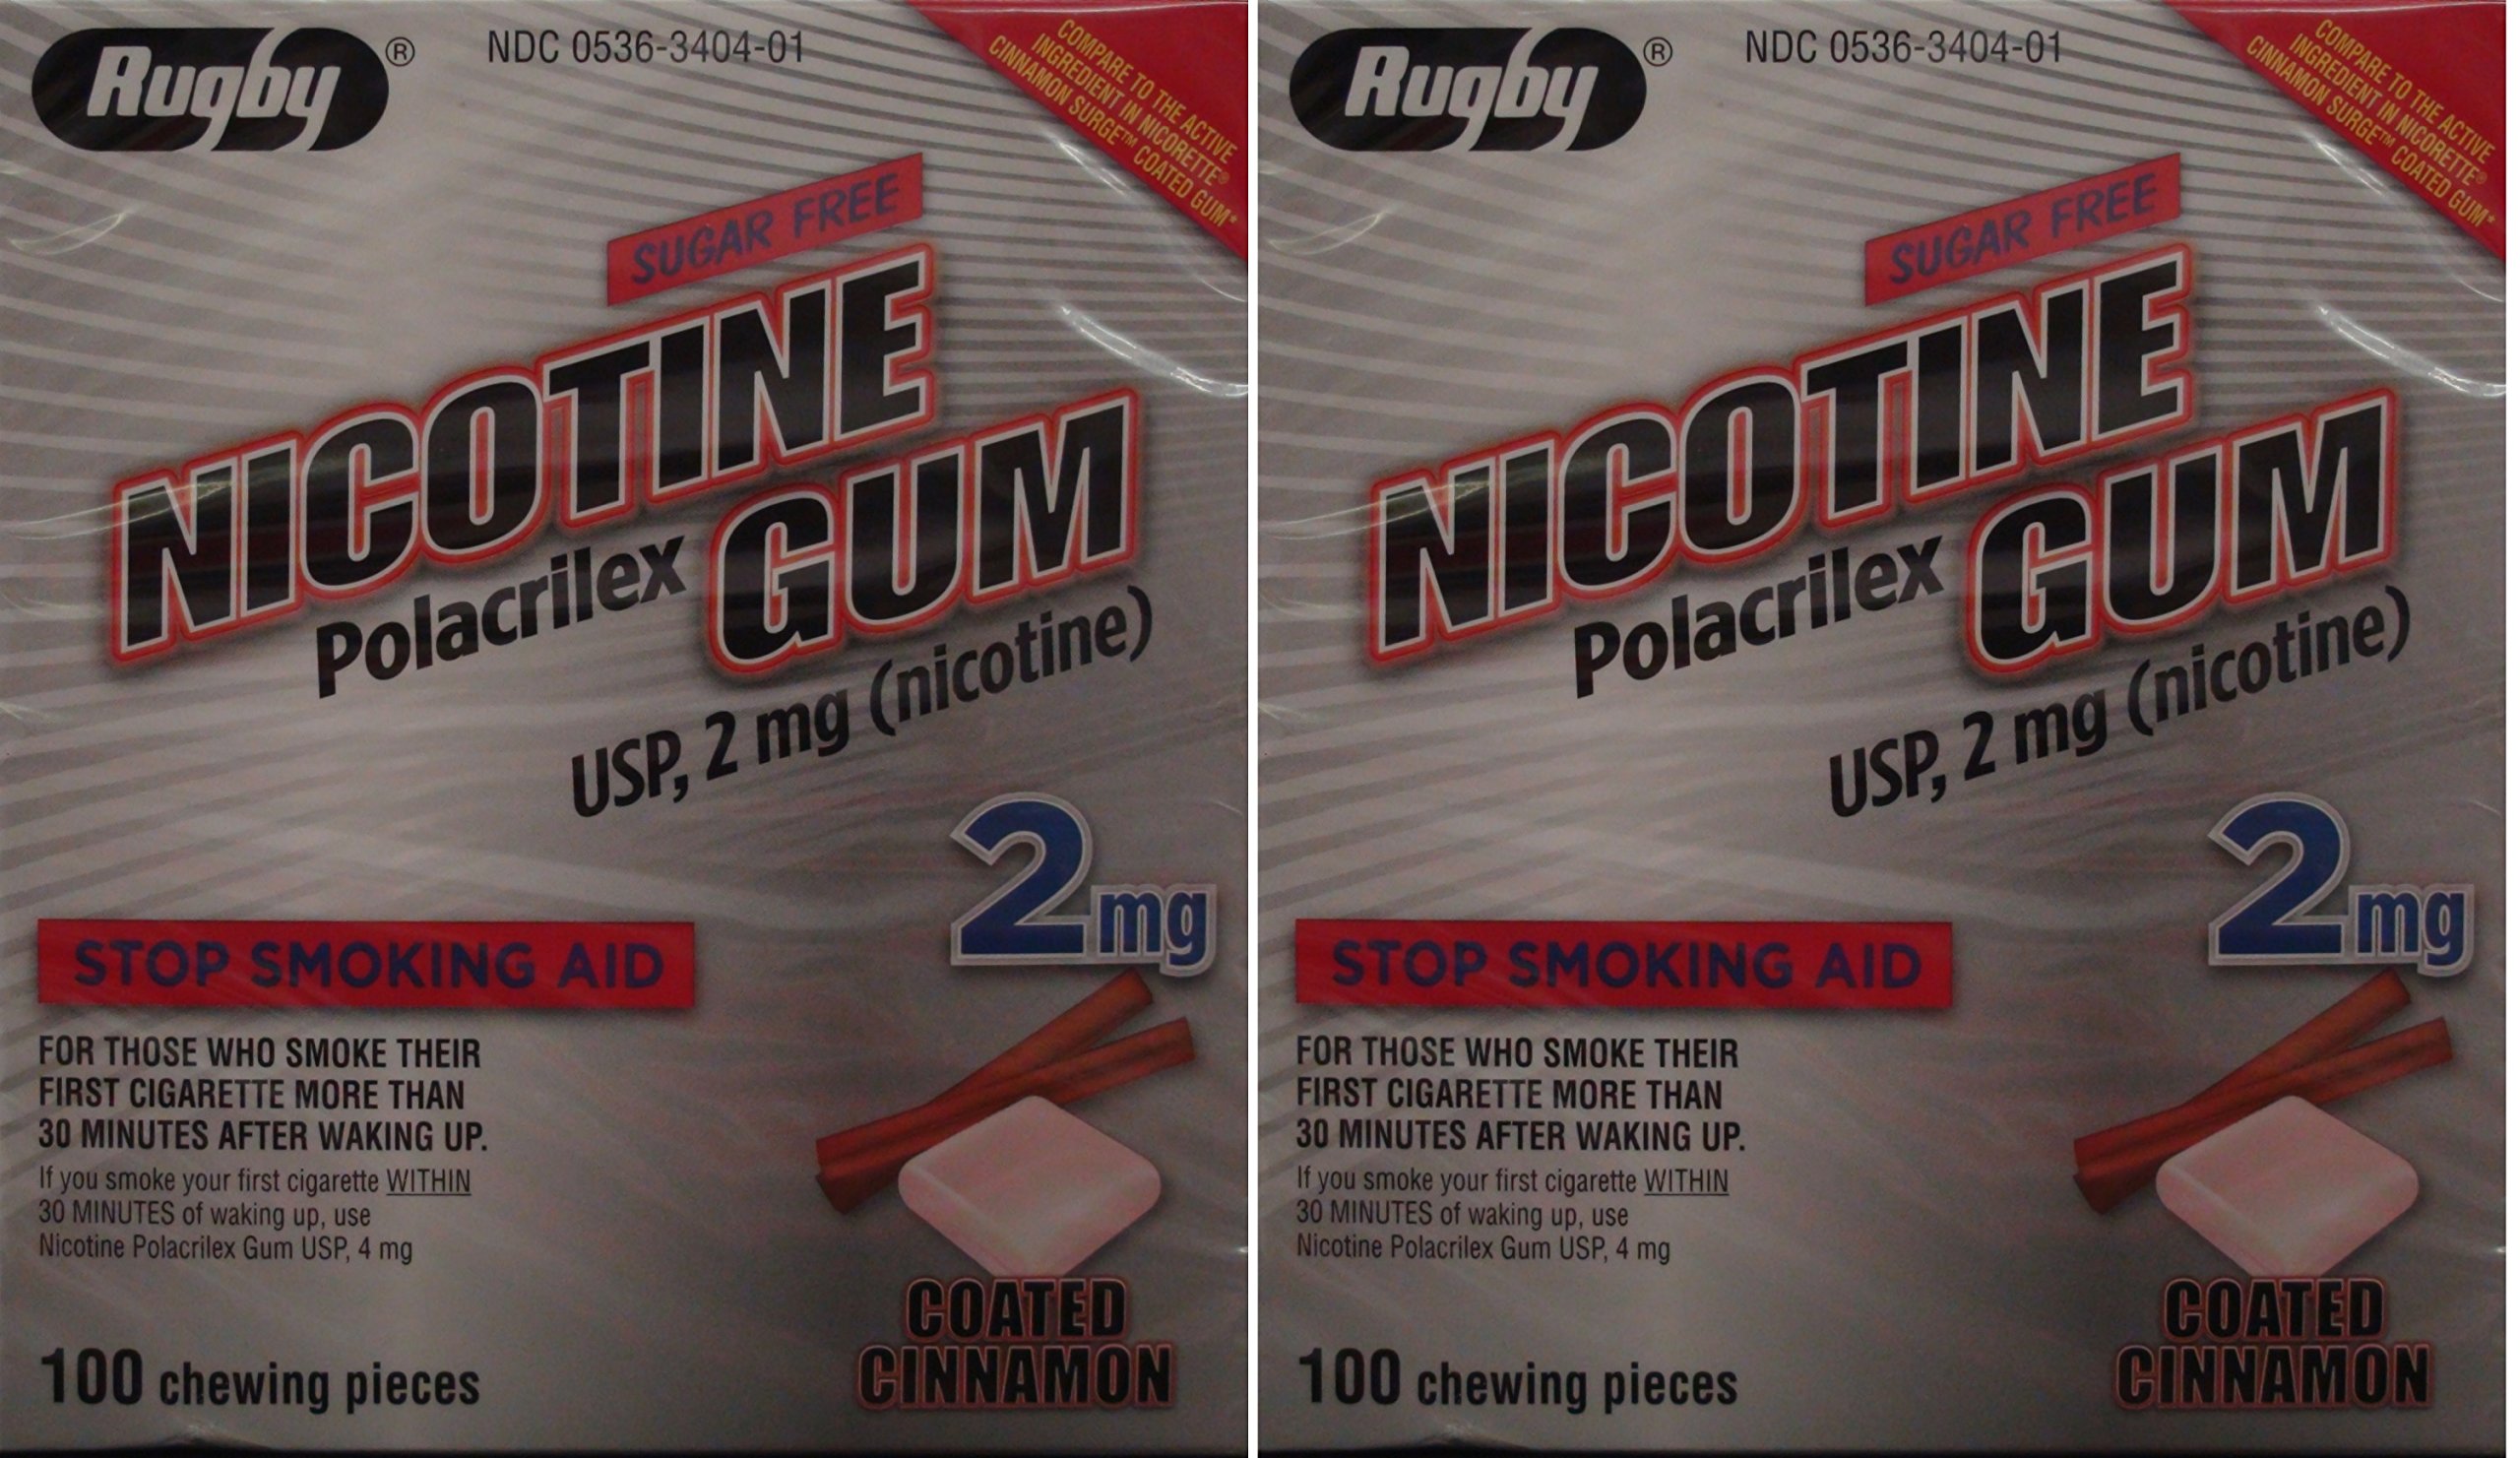 Nicotine Gum 2mg Sugar Free Coated Cinnamon Generic for Nicorette 100 Pieces per Box Pack of 2 Total 200 Pieces